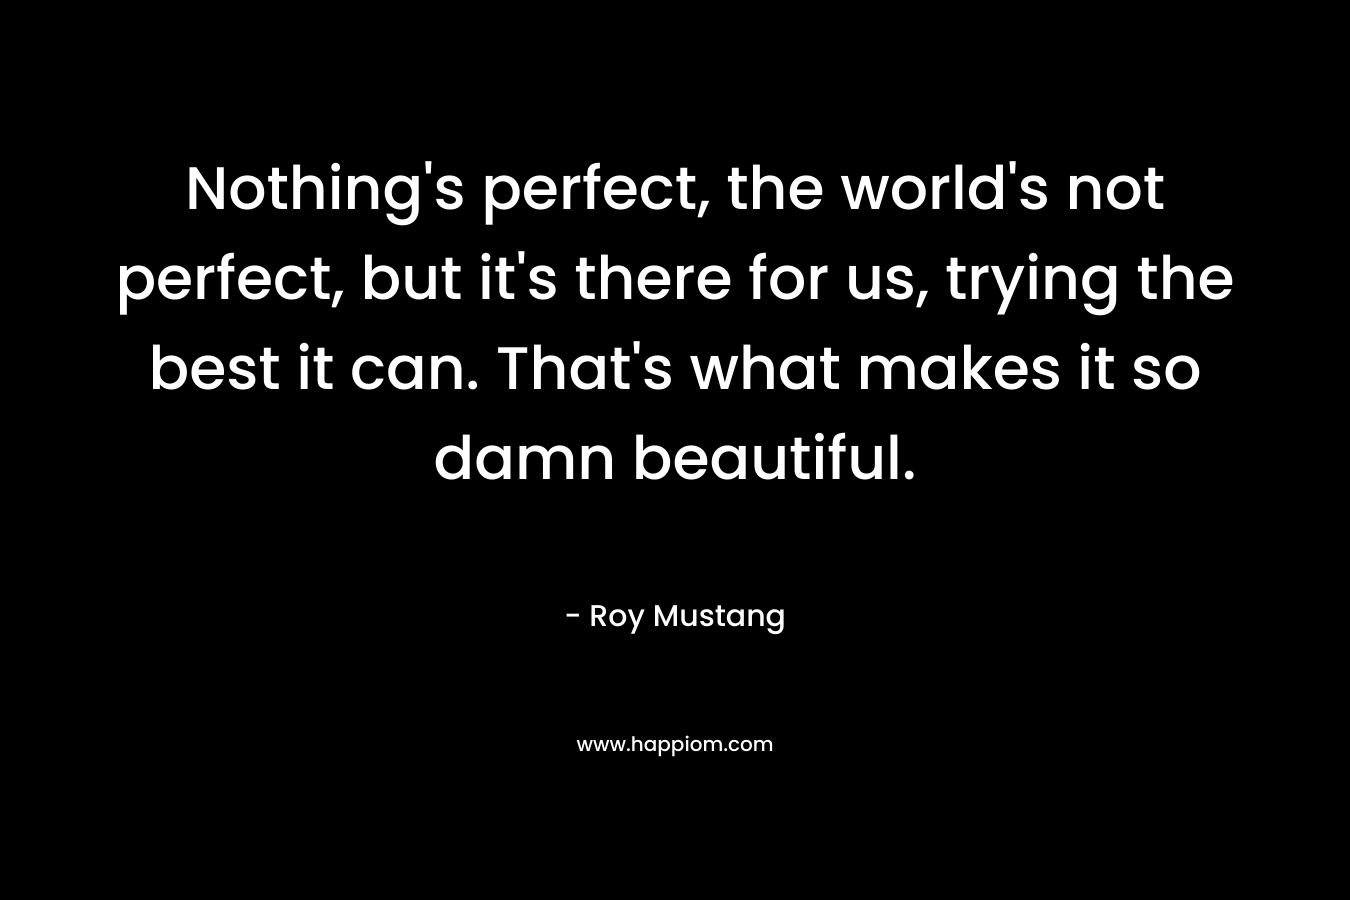 Nothing's perfect, the world's not perfect, but it's there for us, trying the best it can. That's what makes it so damn beautiful.